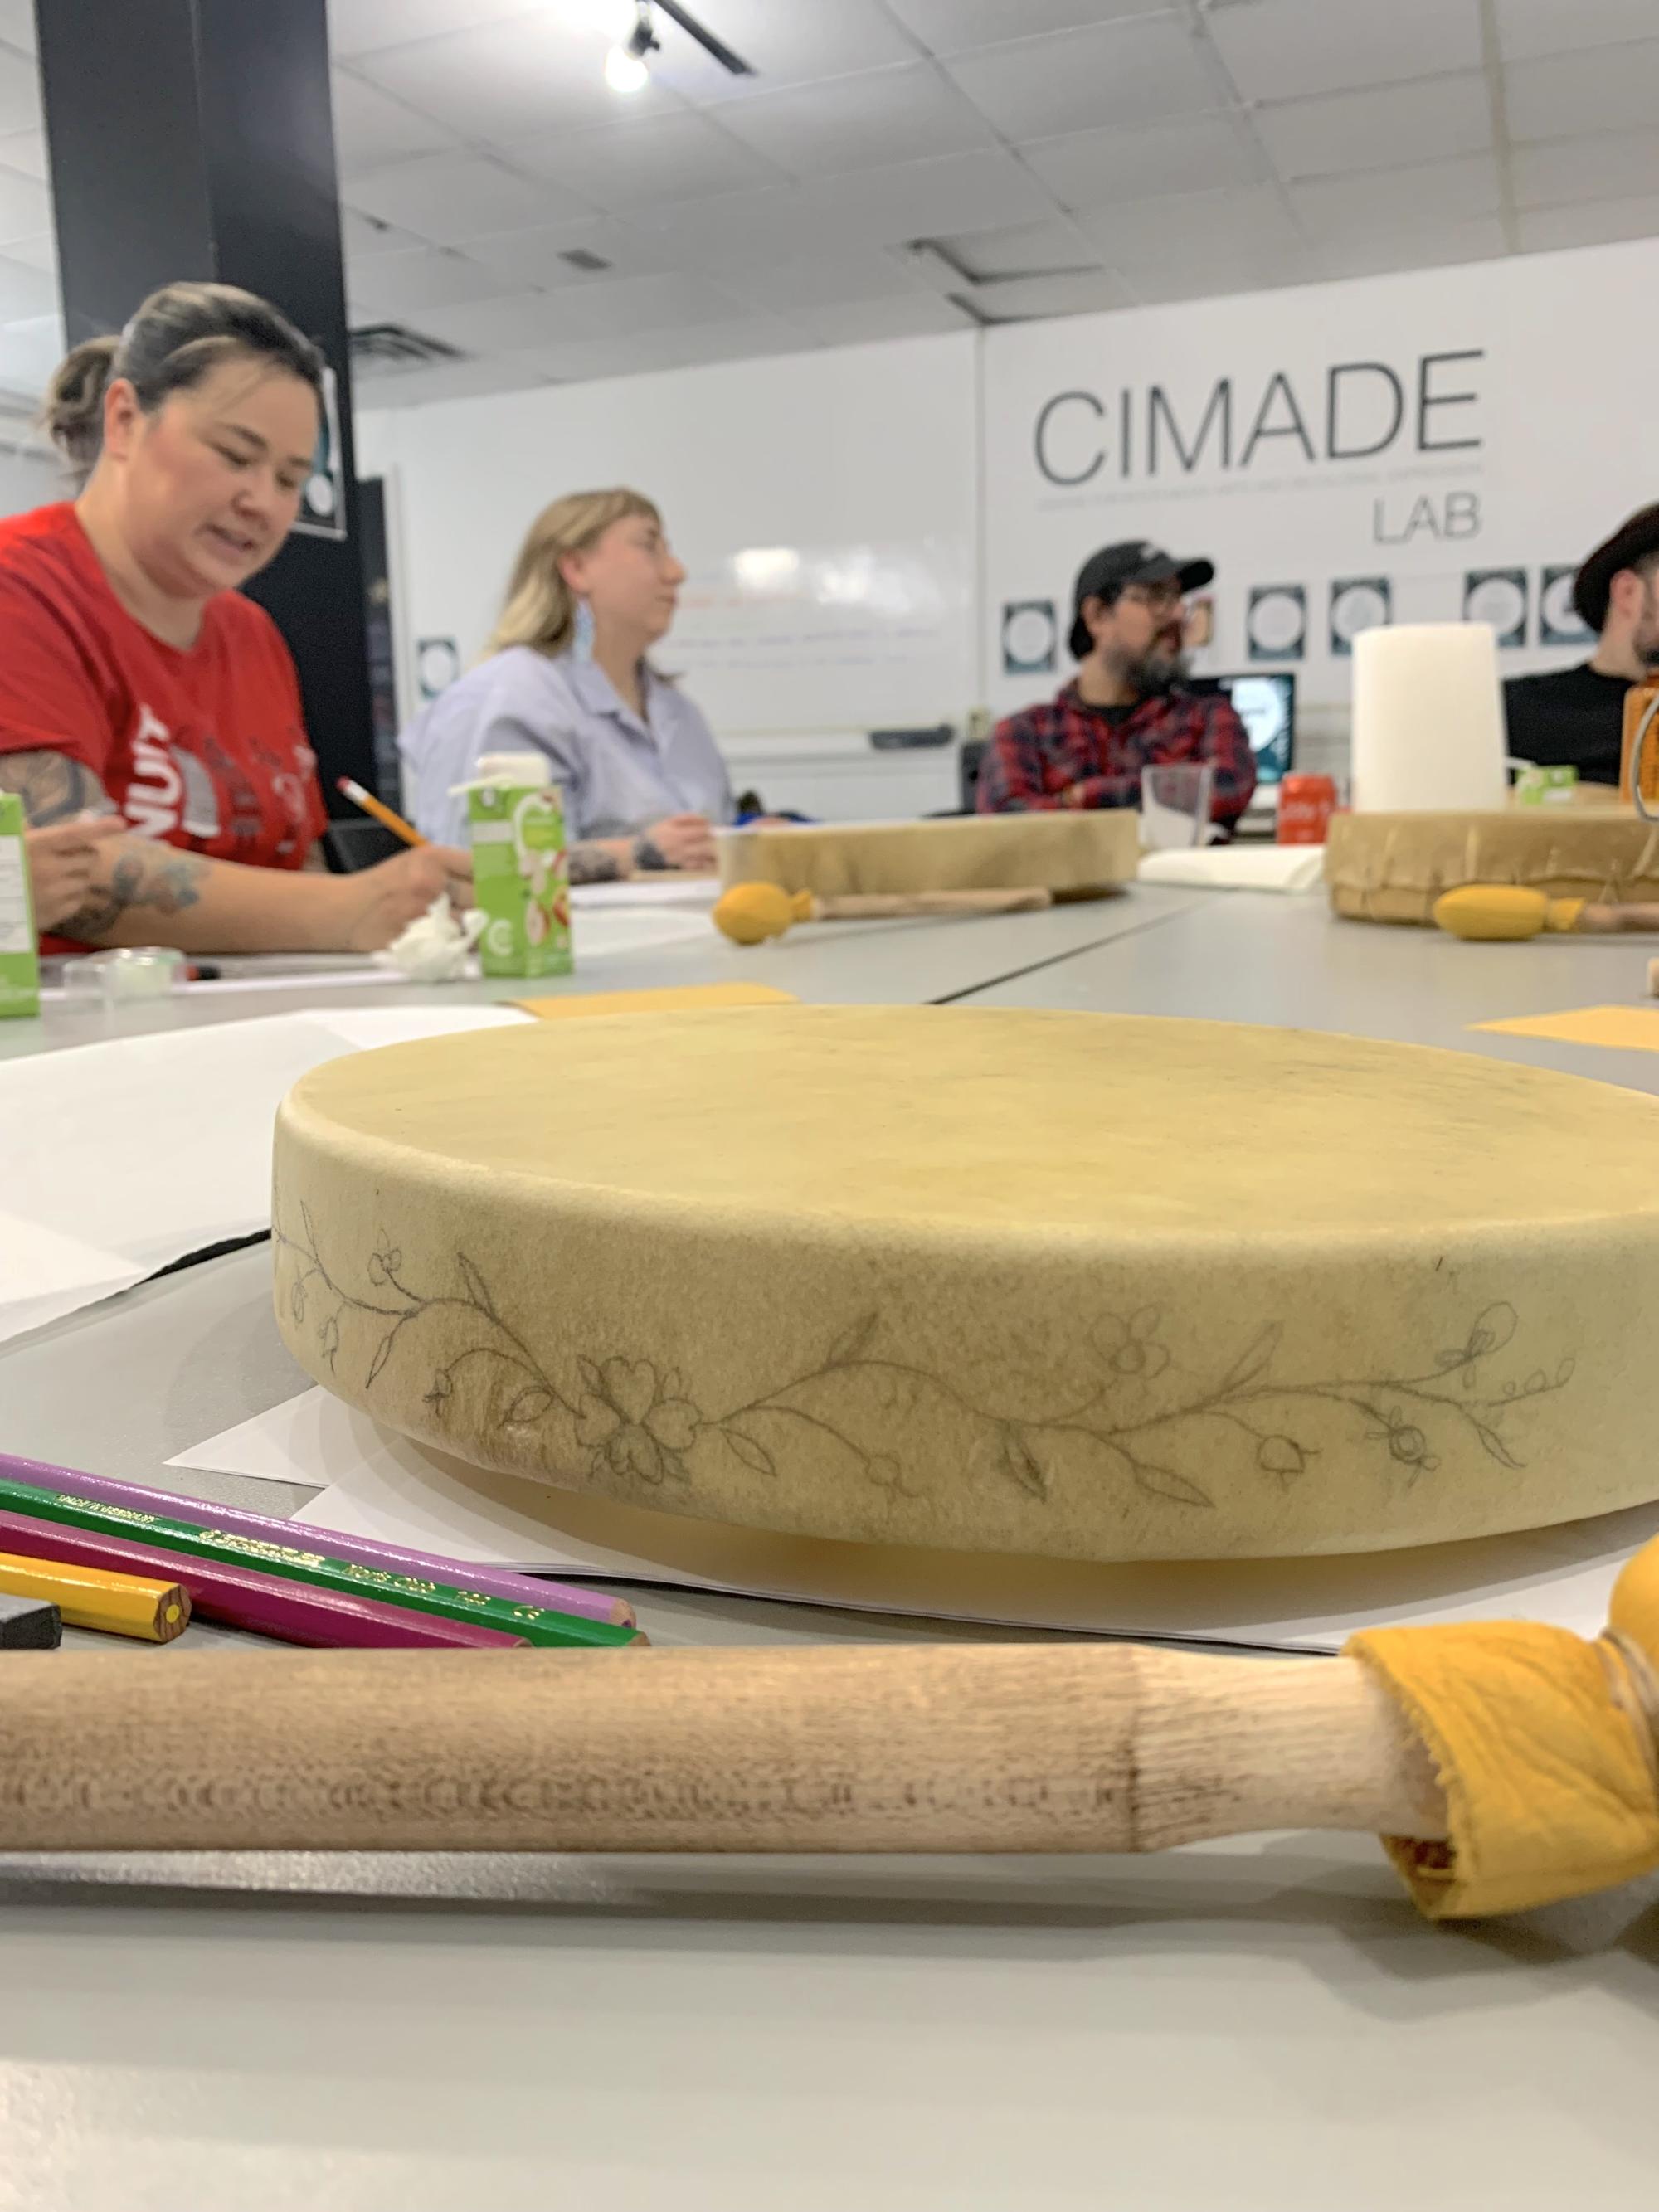 Photograph of a rawhide drum in the foreground, with pencil sketch on its outer edge of a floral design. Workshop participants can be seen smiling in the background